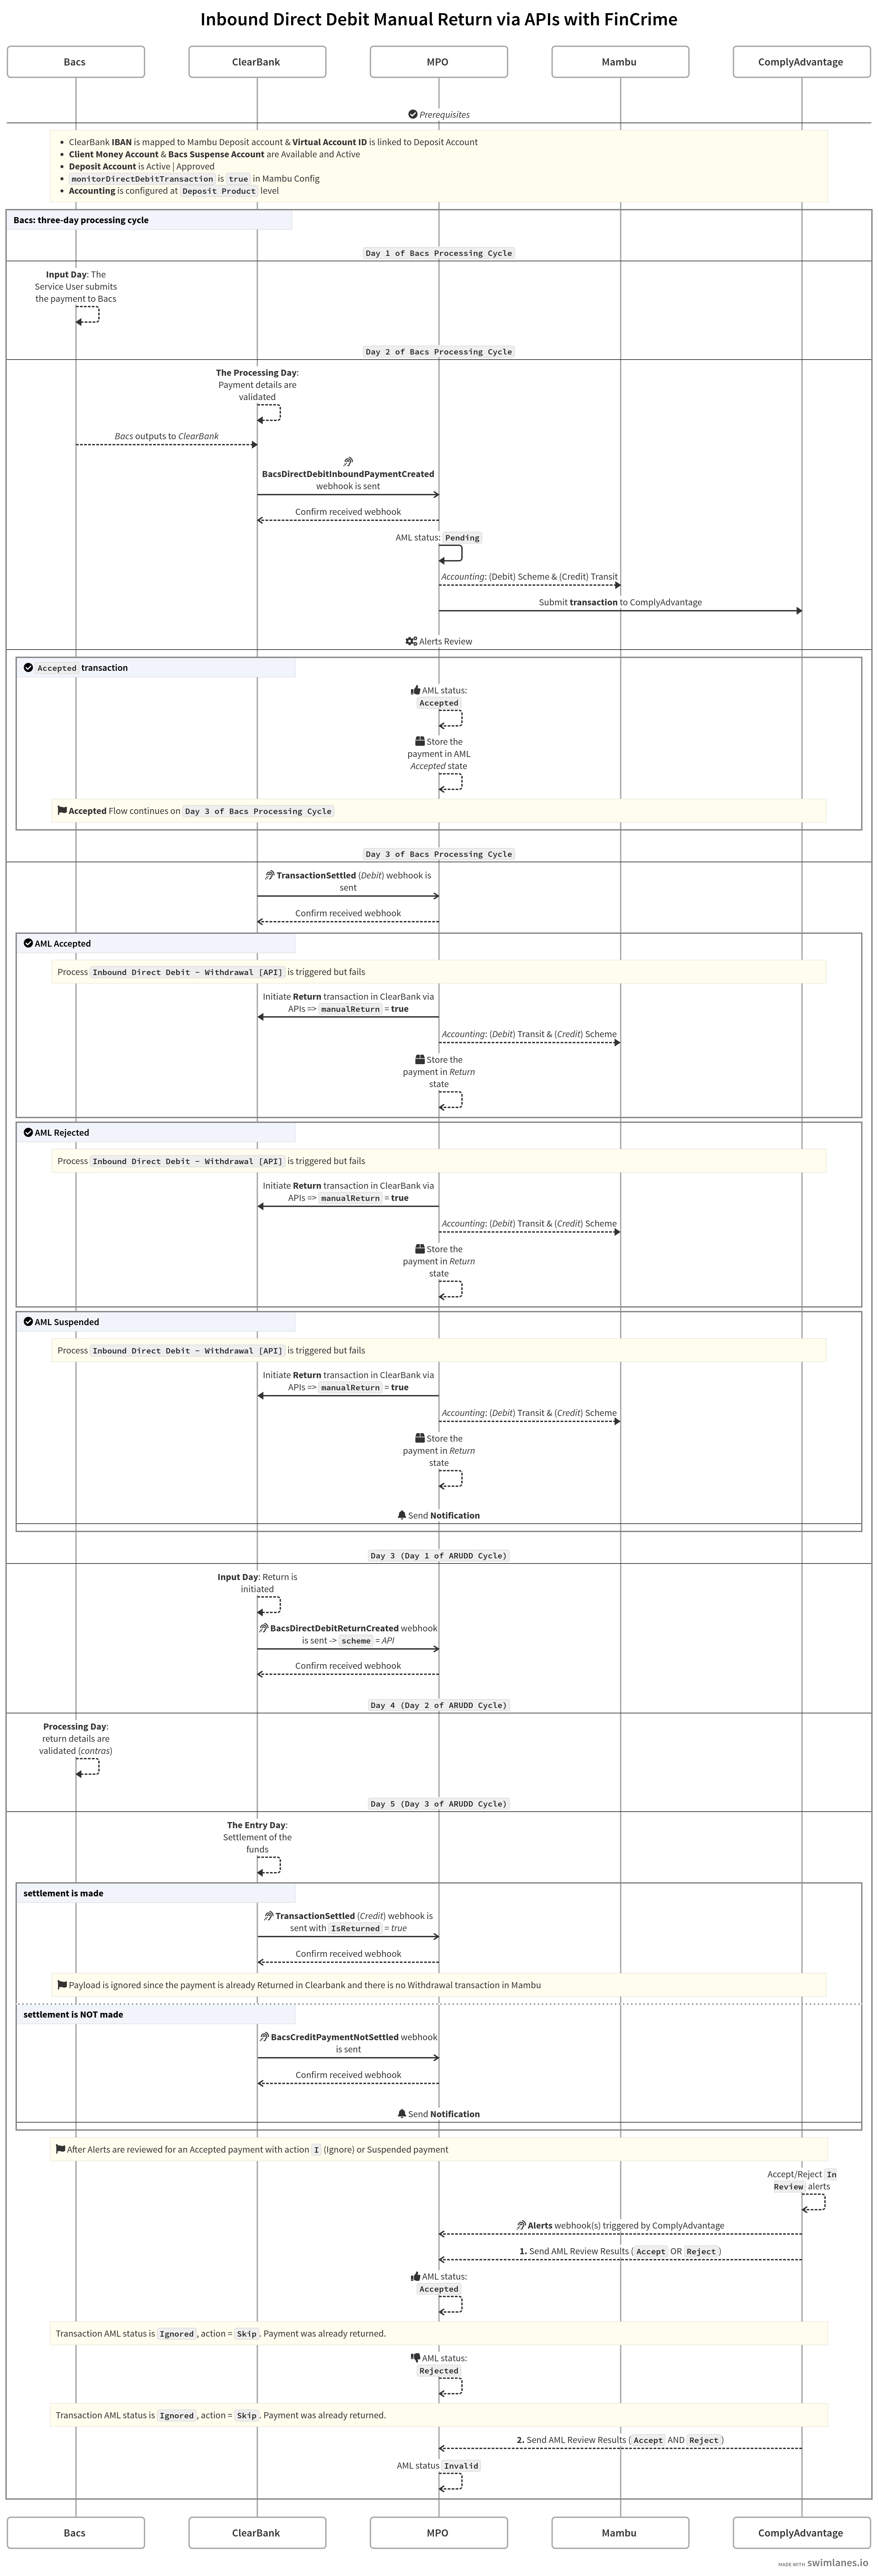 A sequence diagram showing the Inbound Direct Debit Return via API flow between Mambu, MPO, ClearBank, ComplyAdvantage, and Bacs